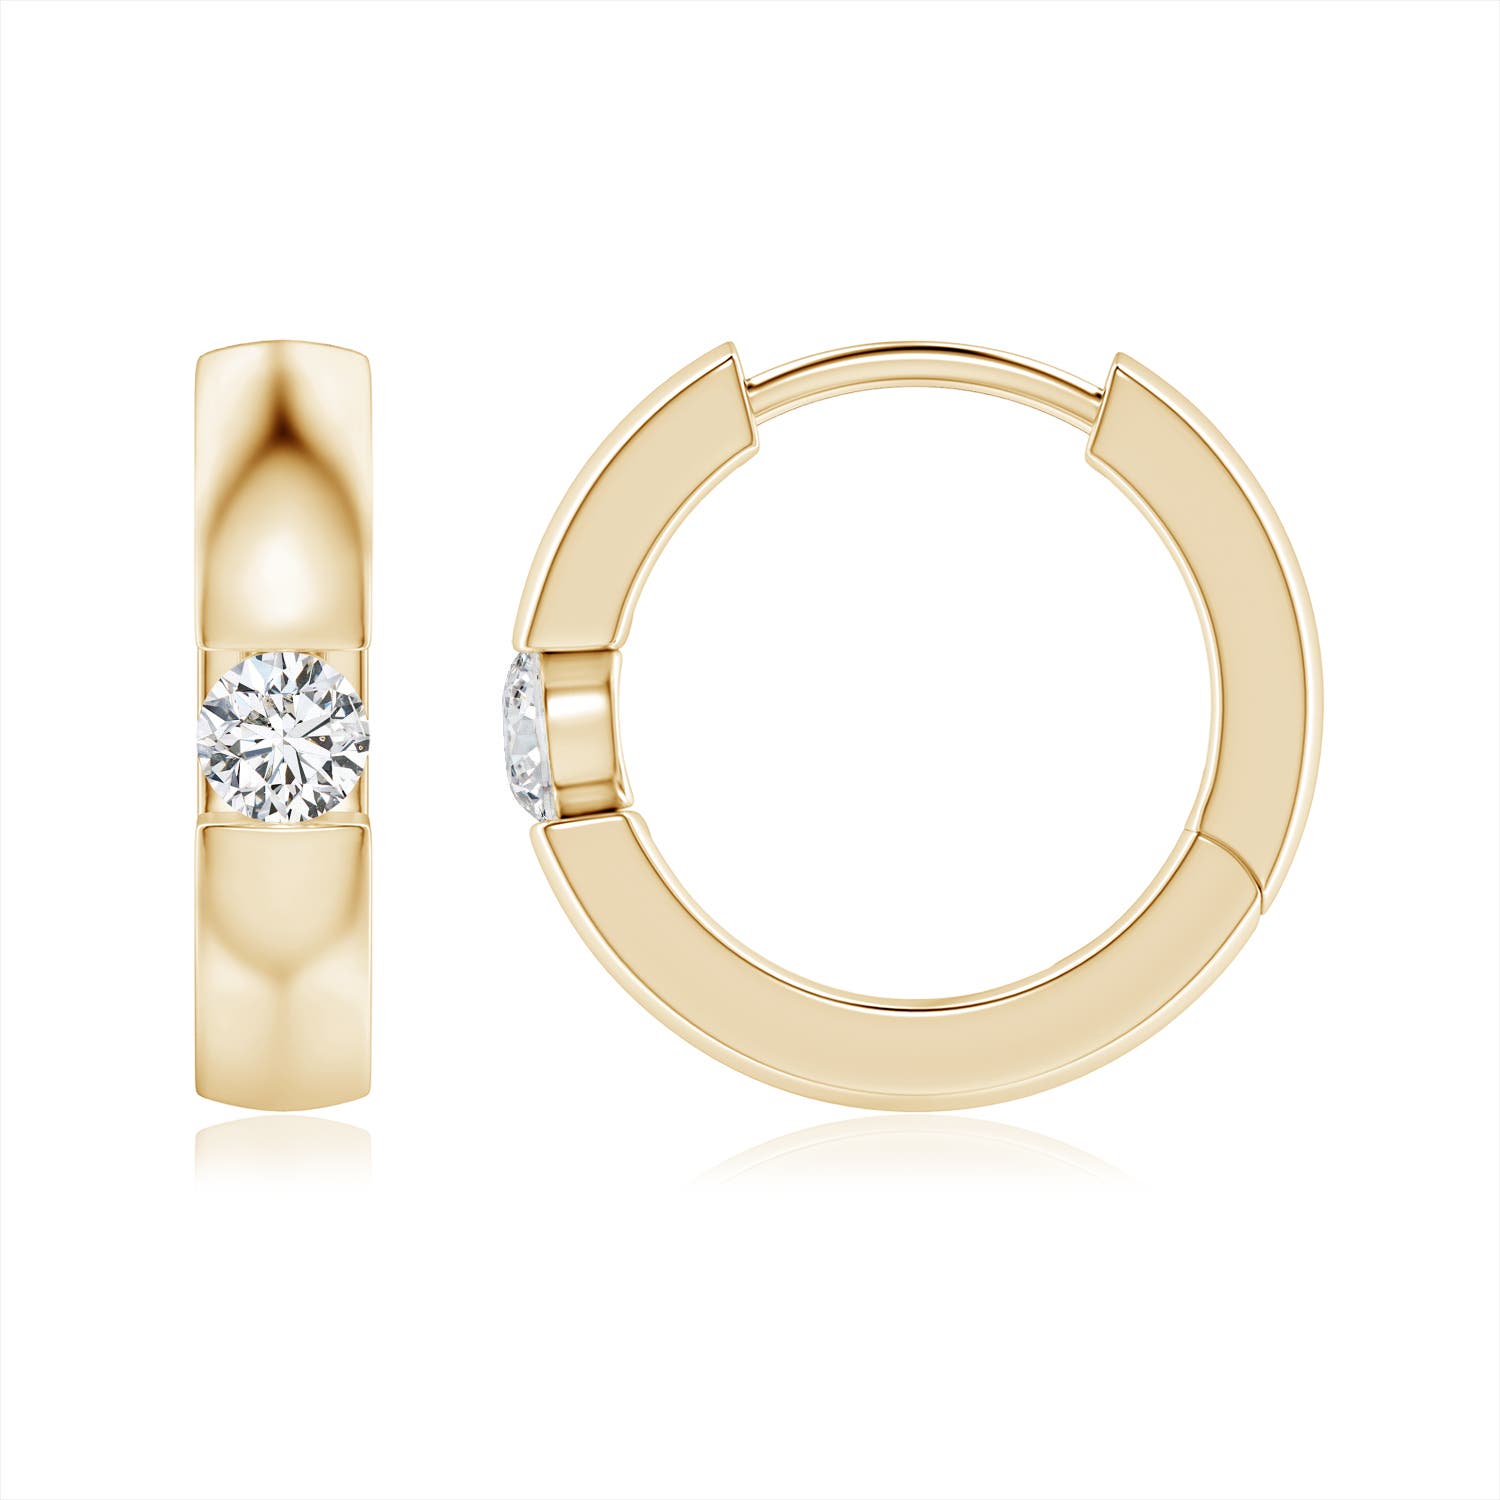 HSI2 / 0.14 CT / 14 KT Yellow Gold